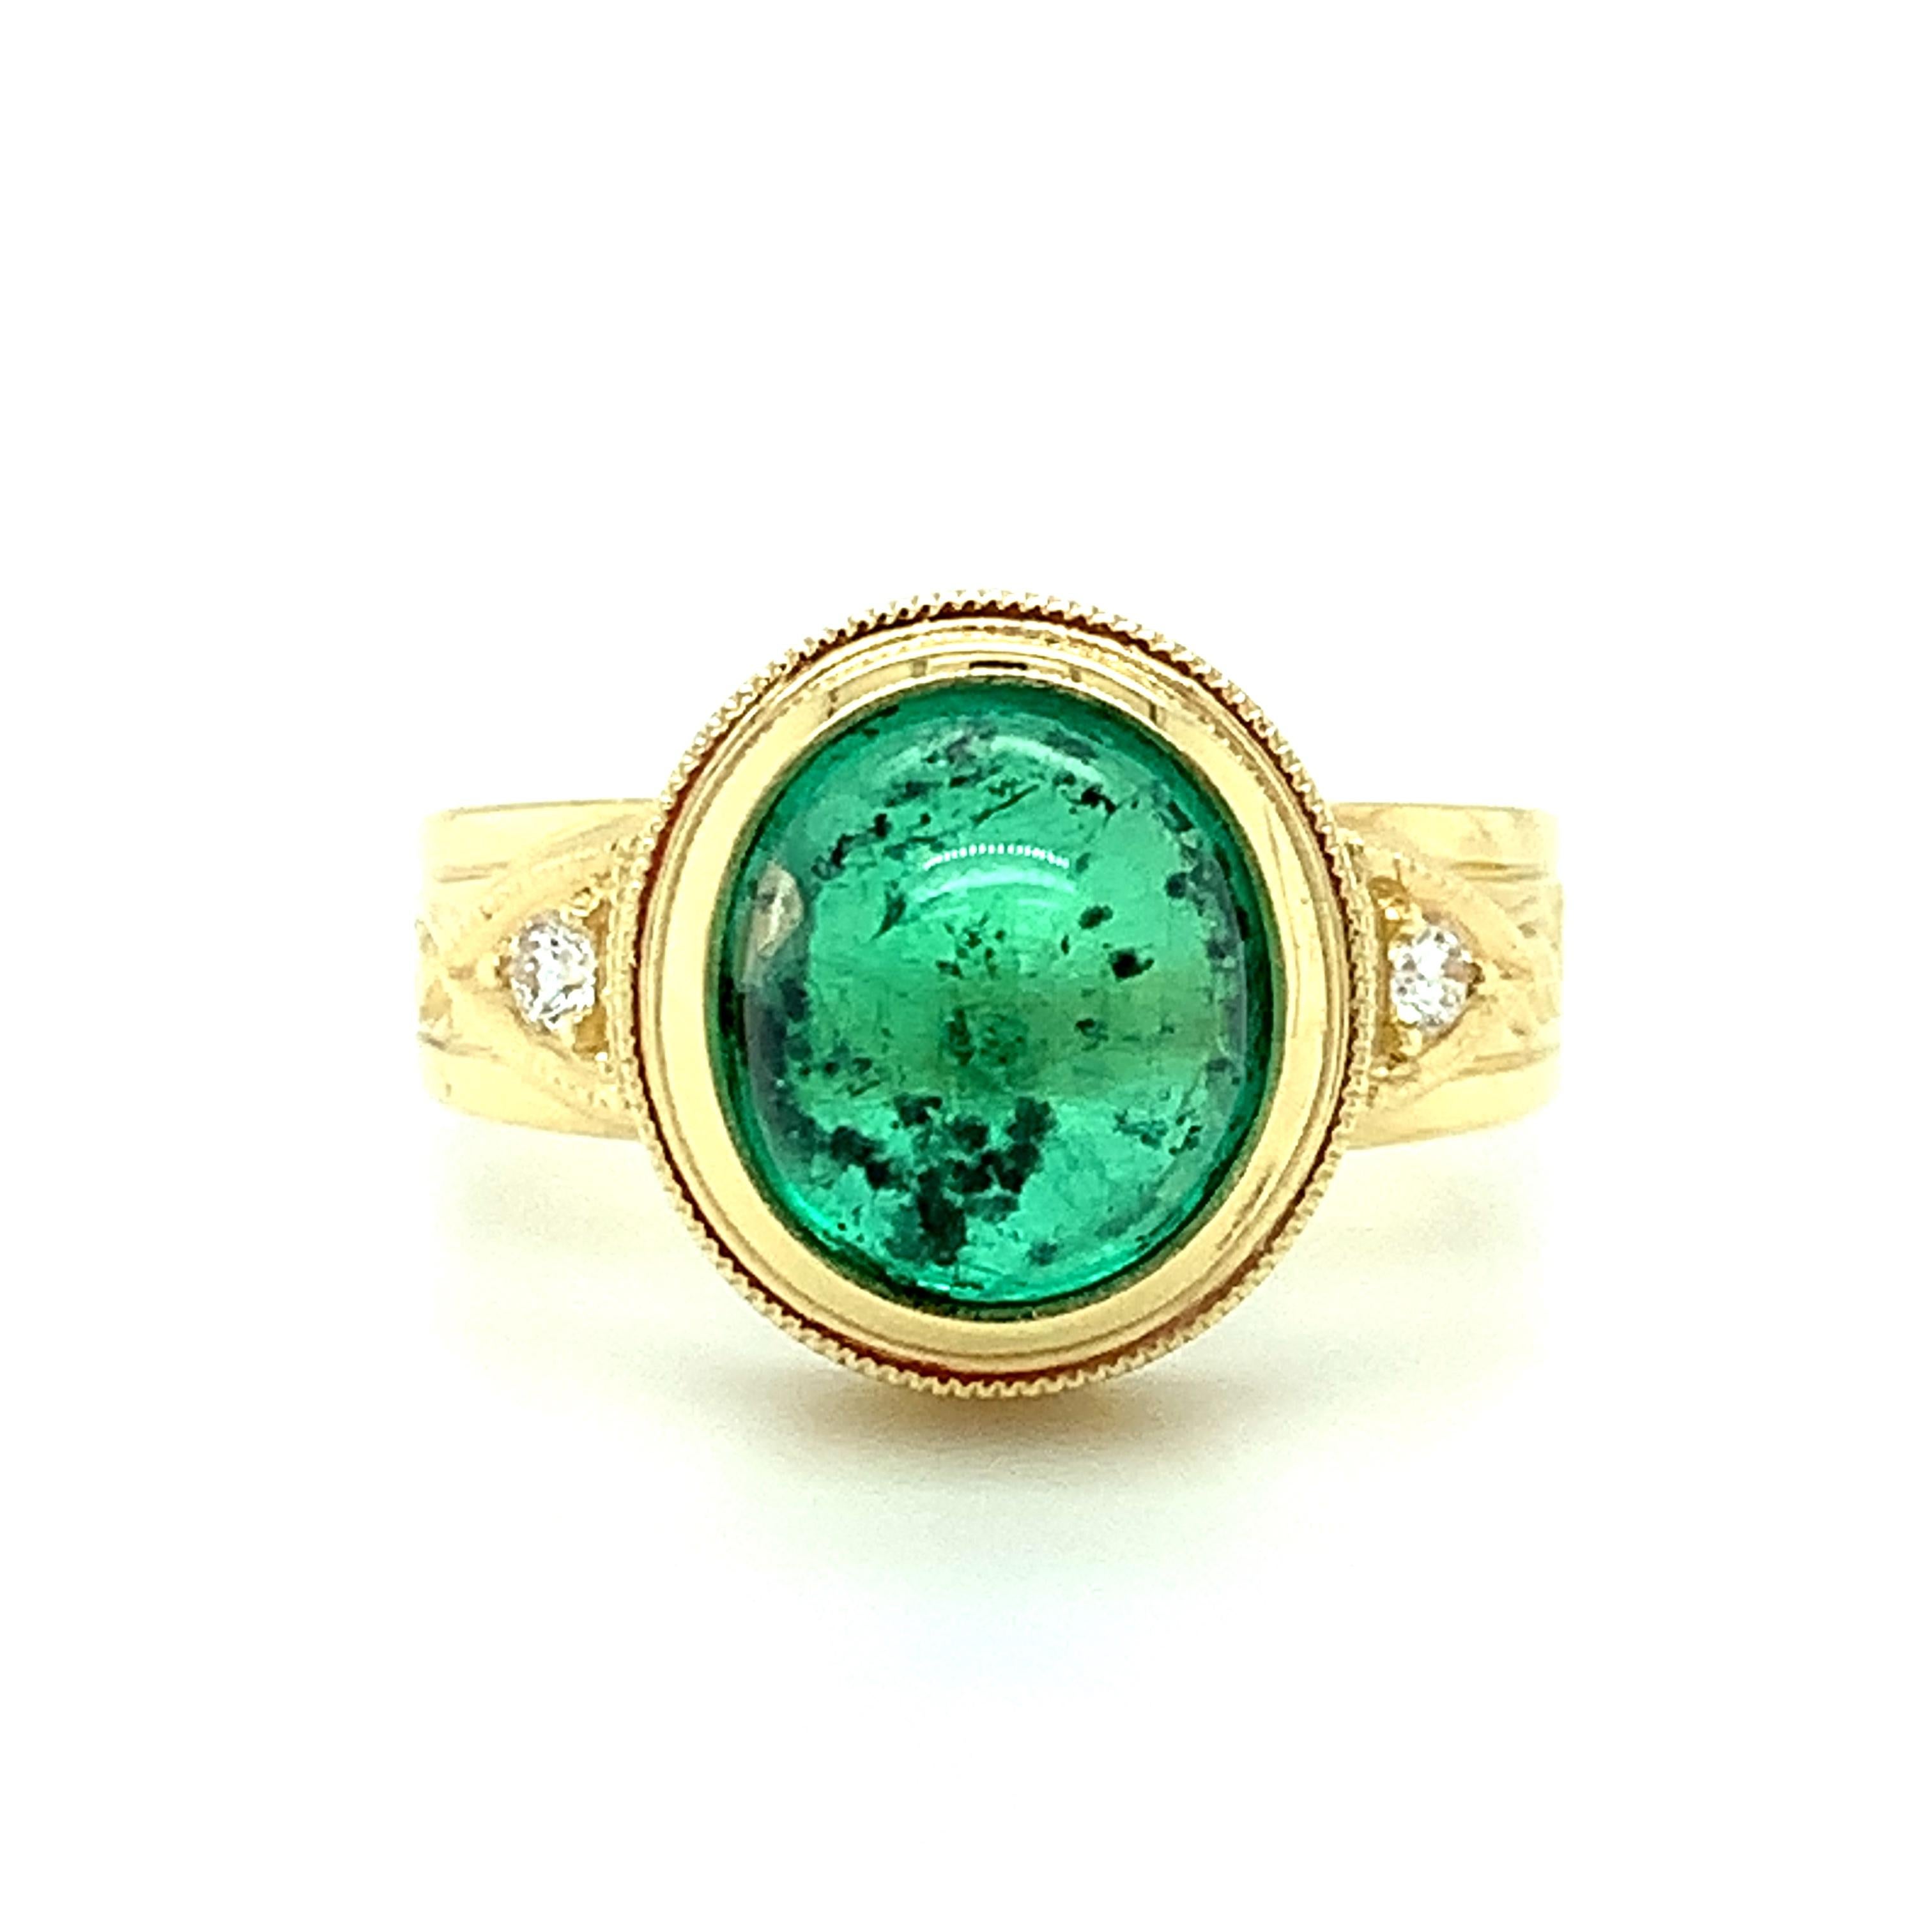 This beautiful 18k yellow gold handmade ring is set with a vibrant green 3.57 carat emerald cabochon and round brilliant cut diamonds in one of our signature designs. The ring was custom made for this emerald, using old-world techniques and a level